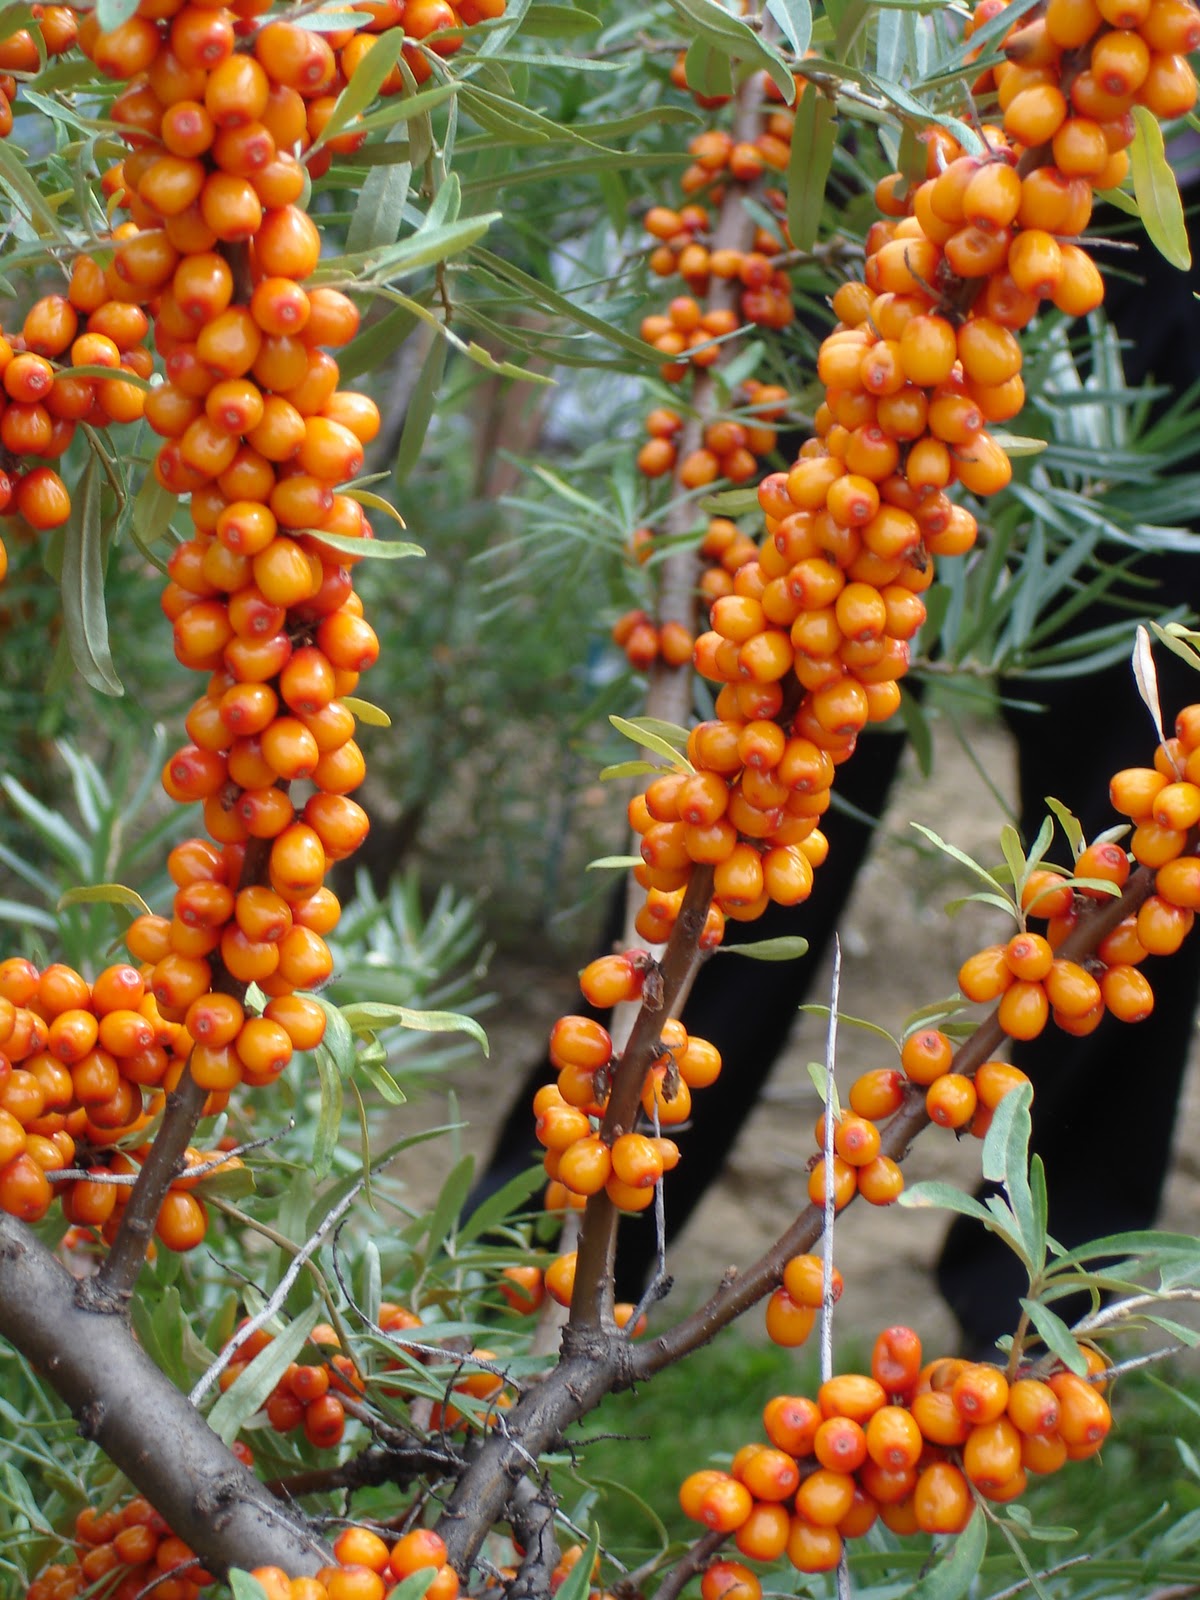 sea buckthorn berries plant iphone wallpaper used juice served addition whole parts into made